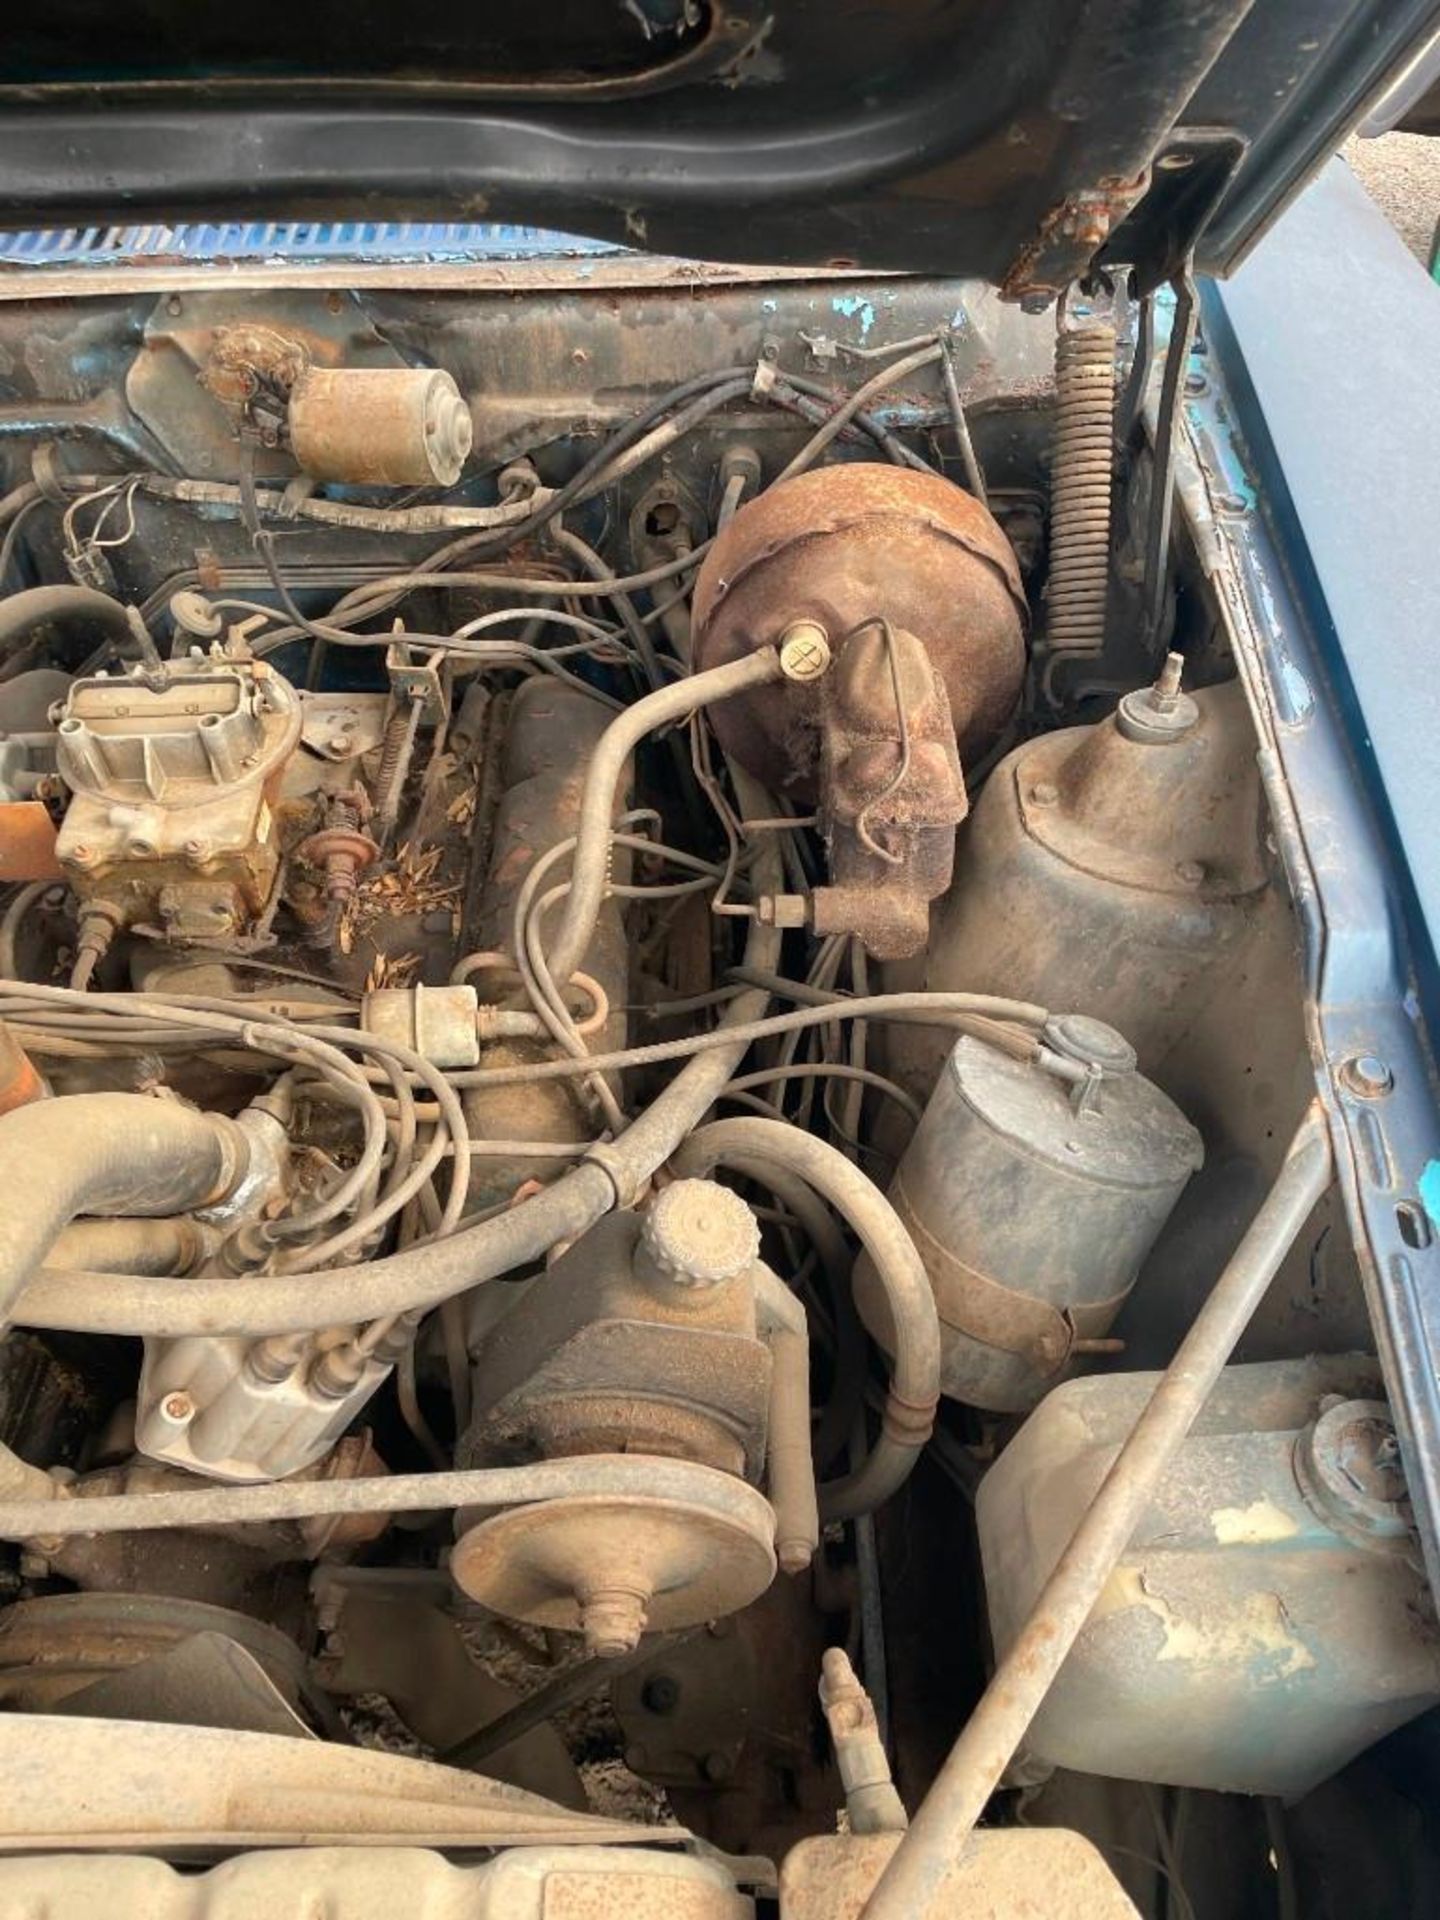 1972 AME JAVELIN, VIN# A2C797H268139, V8 ENGINE (DOES NOT RUN, HAS SALVAGE TITLE) - Image 21 of 35